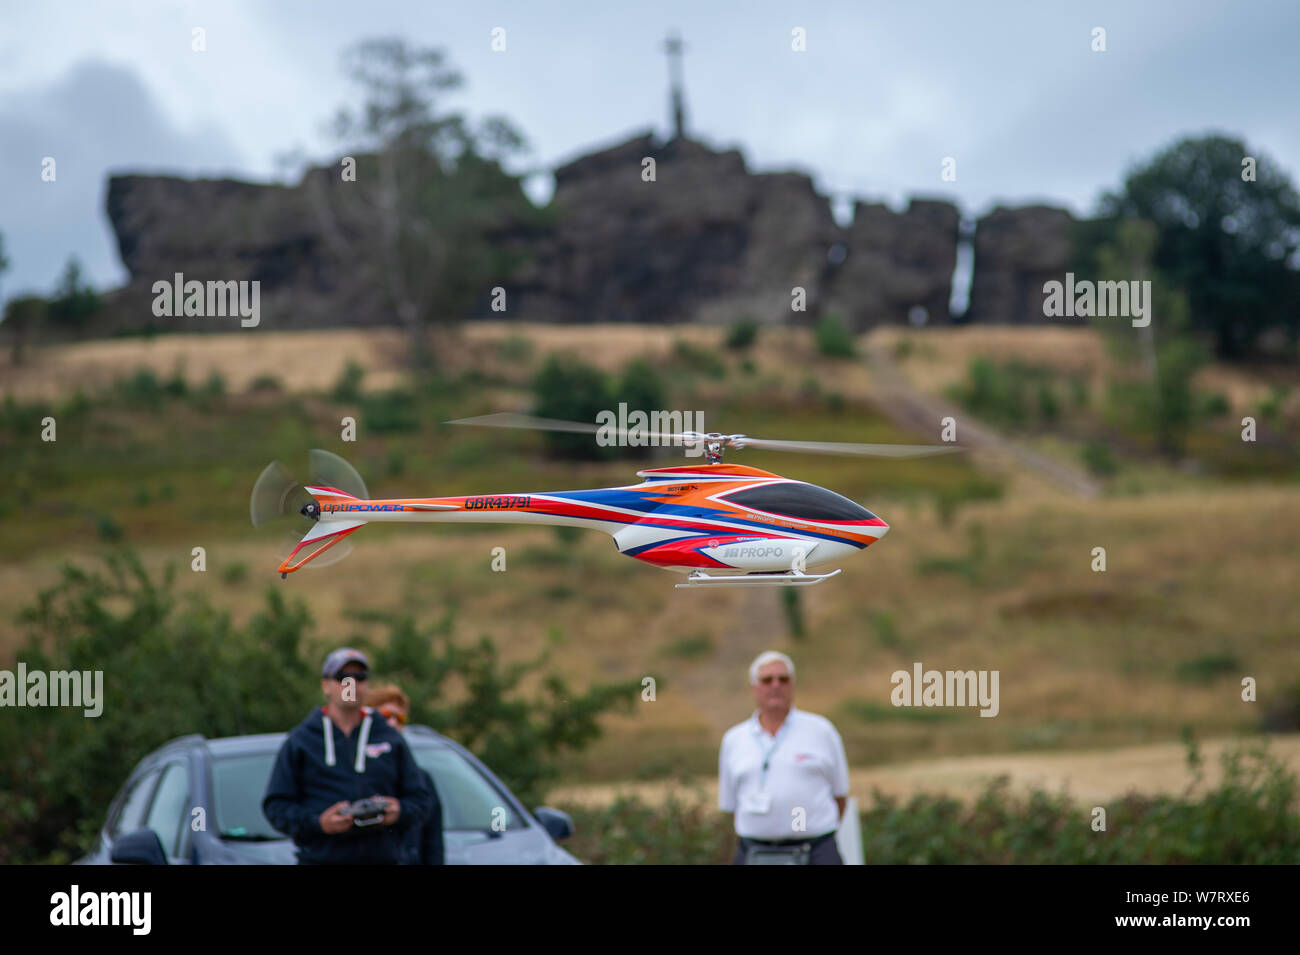 07 August 2019, Saxony-Anhalt, Ballenstedt: Stephen Roberts (l) from Team  Great Britain starts his model helicopter type Japan Radio 05. In the  background you can see the Gegensteine, a rock formation that